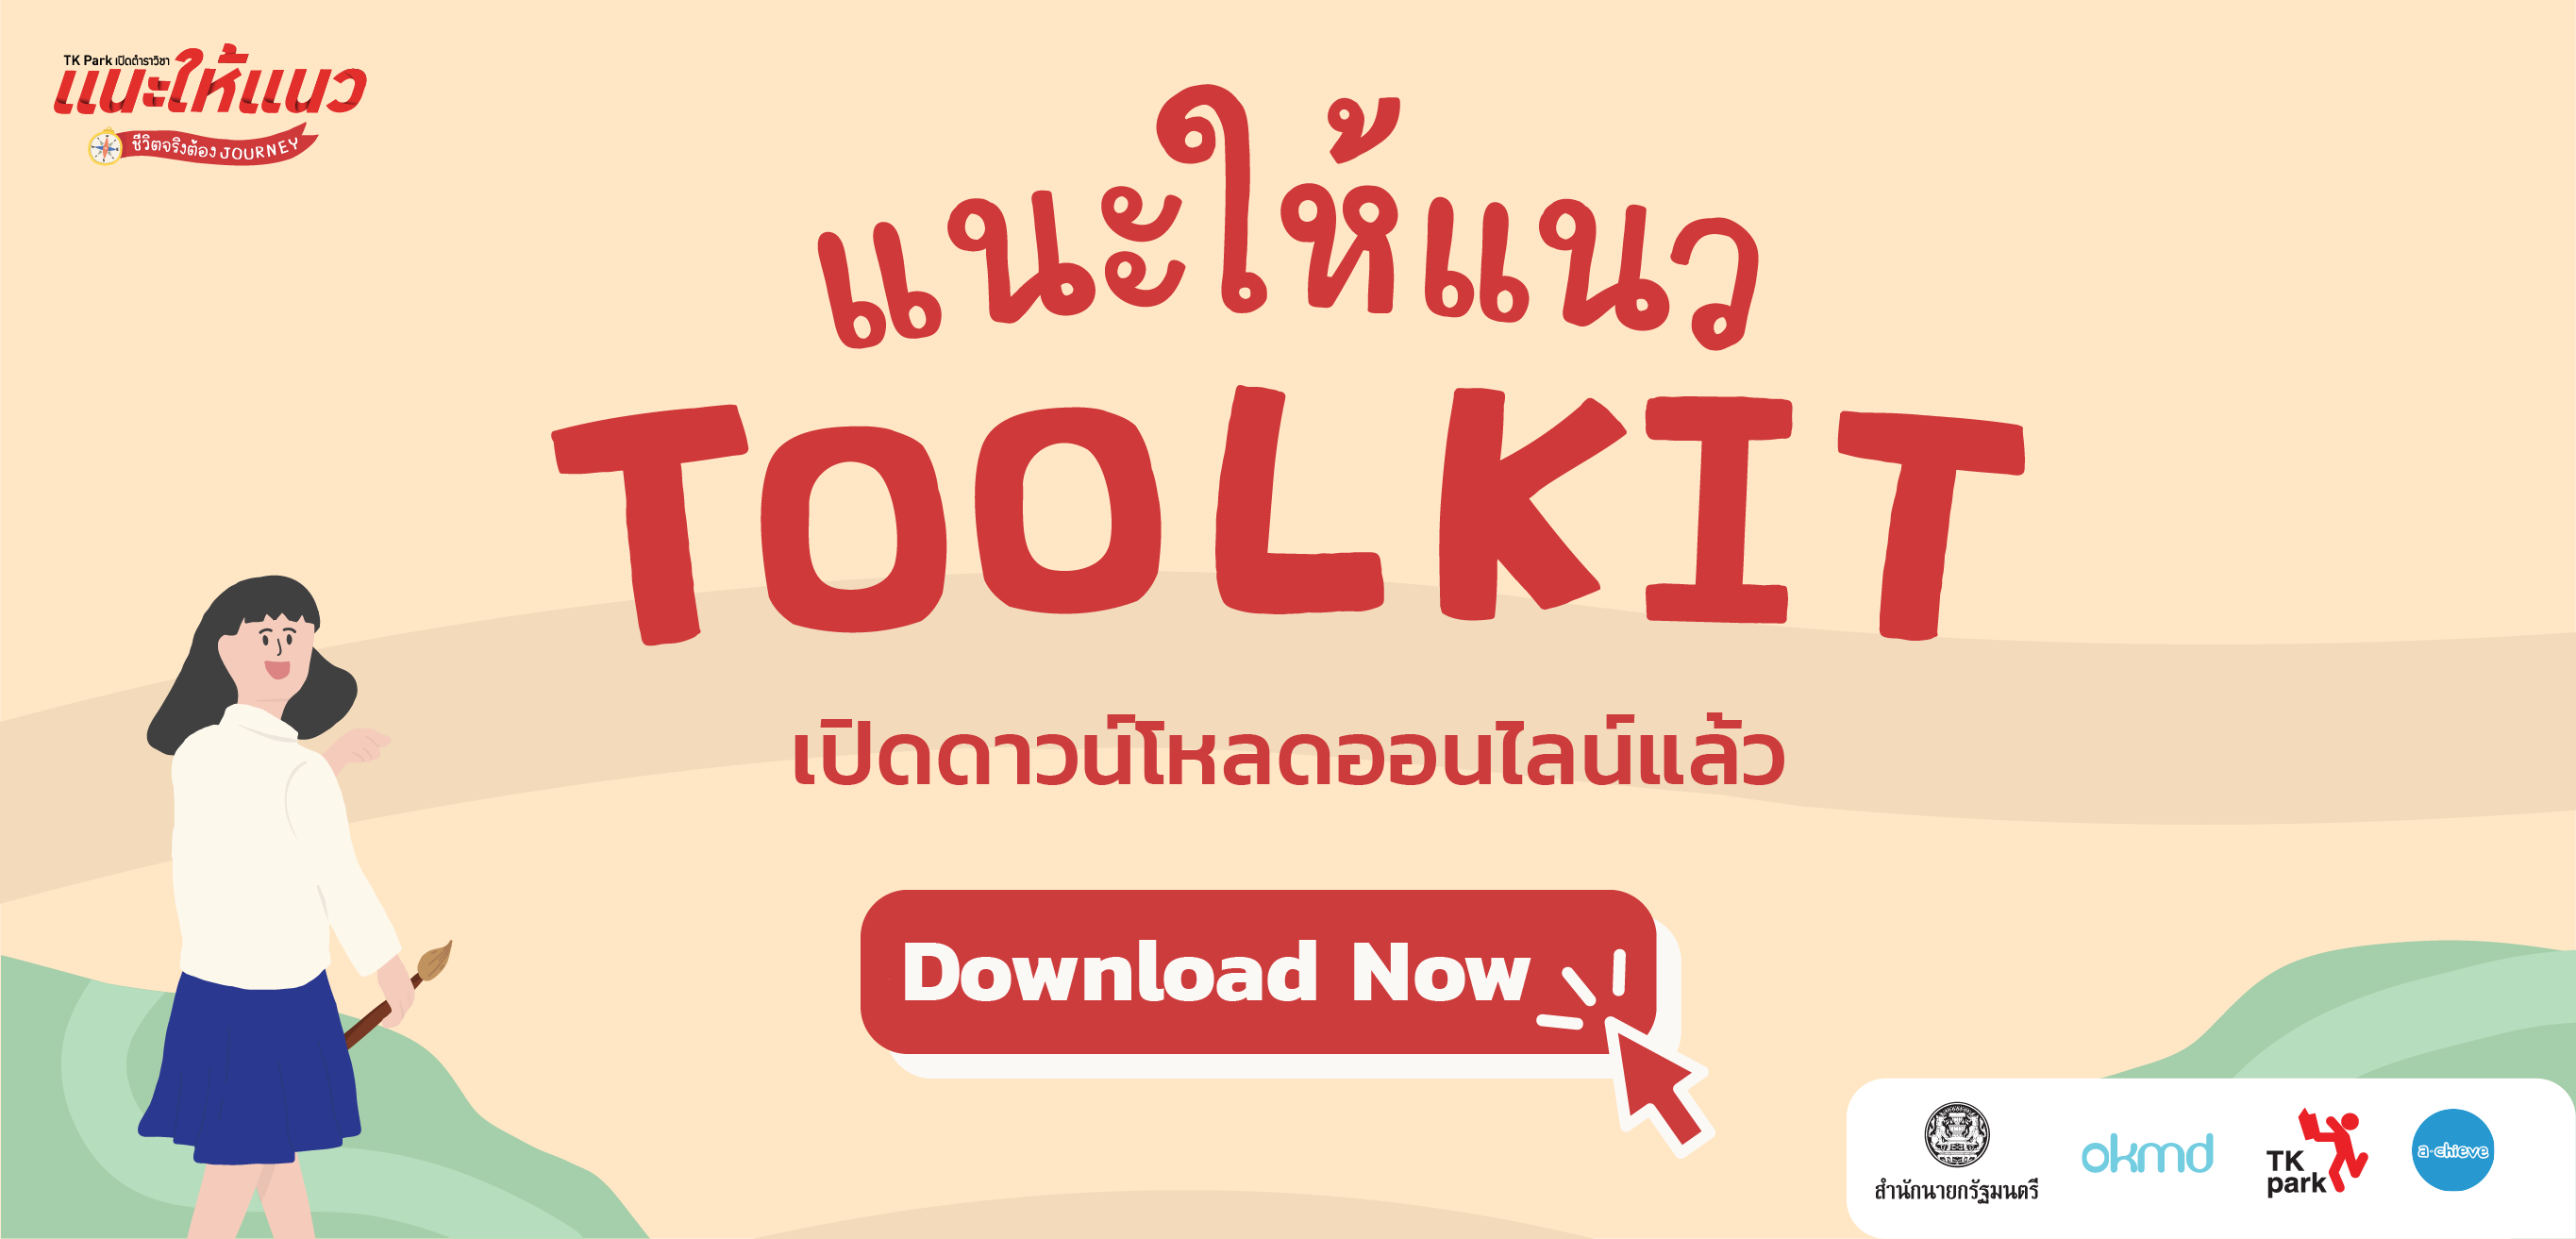 download-toolkit-for-website.png